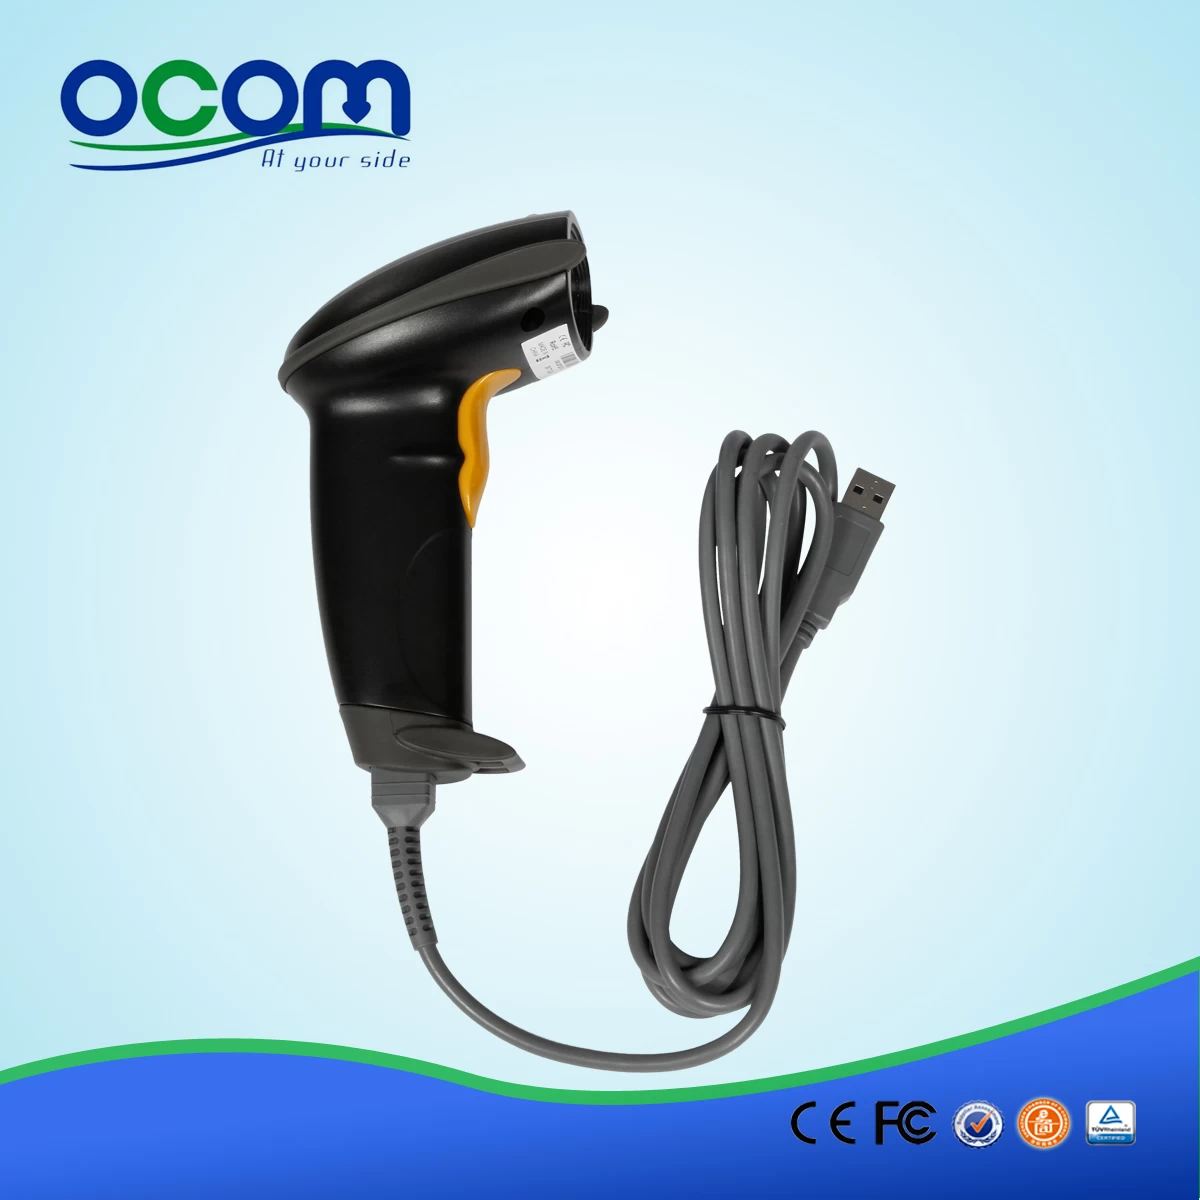 China factory supply usb barcode scanner